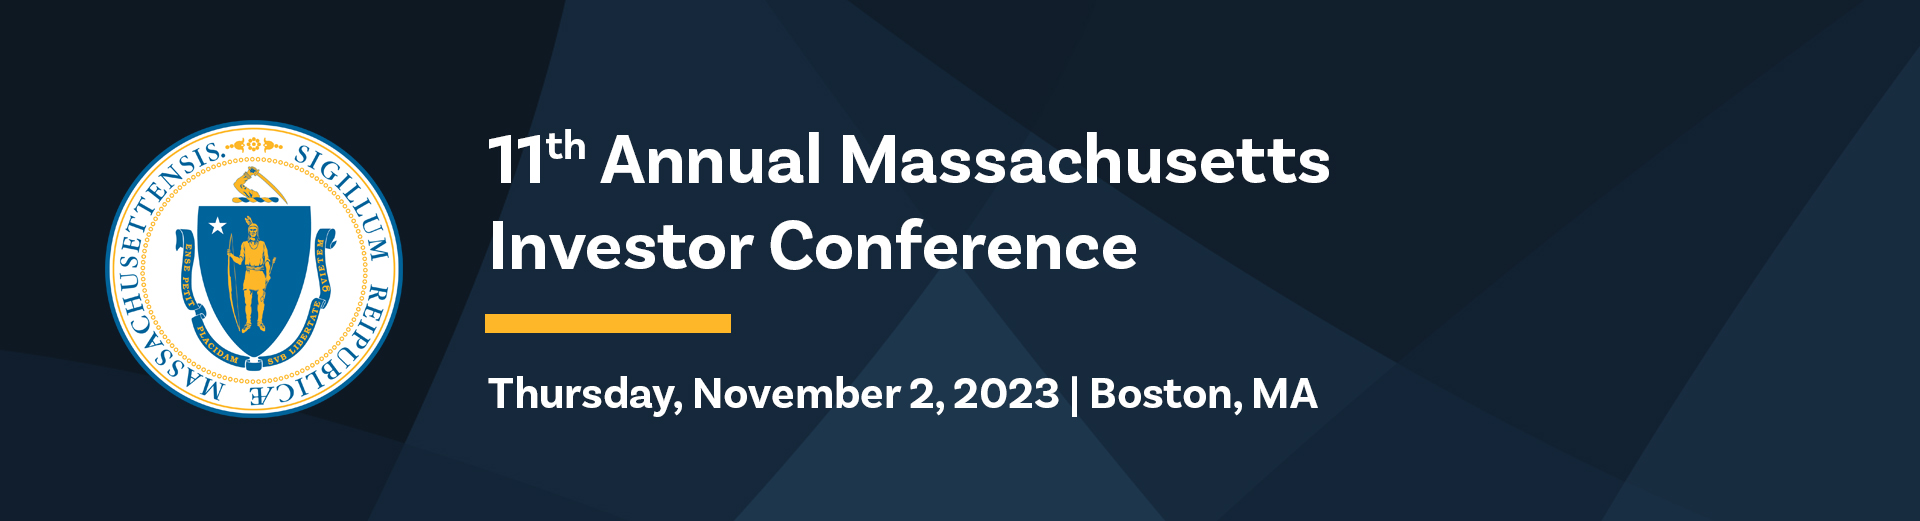 Dark blue banner with white text reads '11th Annual Massachusetts Investor Conference' with Commonwealth logo